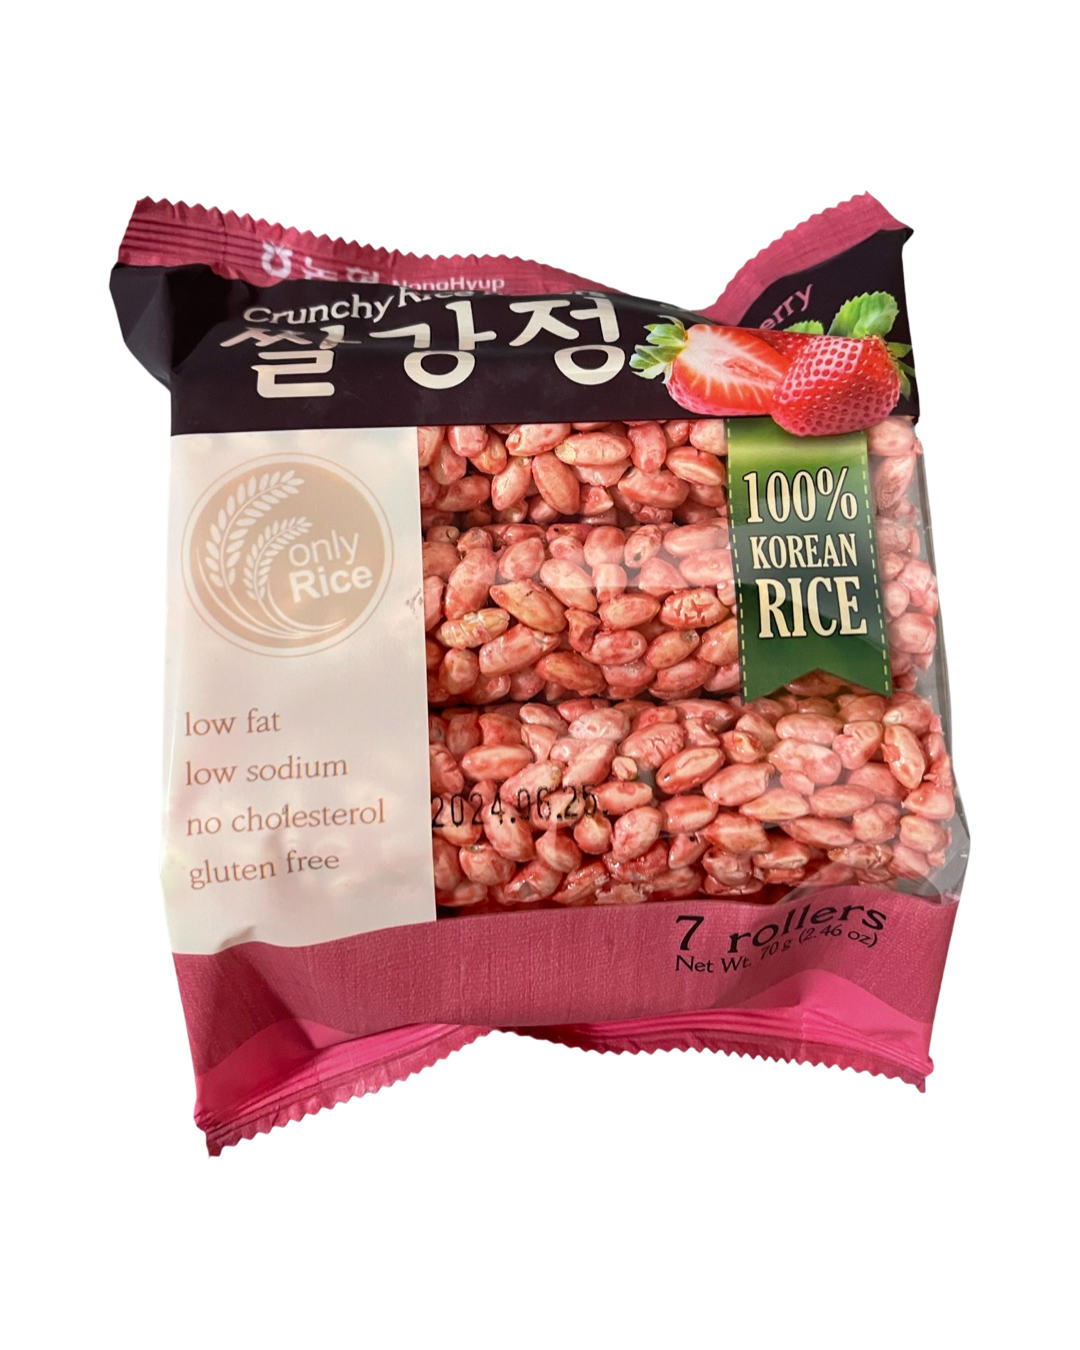 CRUNCHY RICE ROLLERS - STRAWBERRY 70g